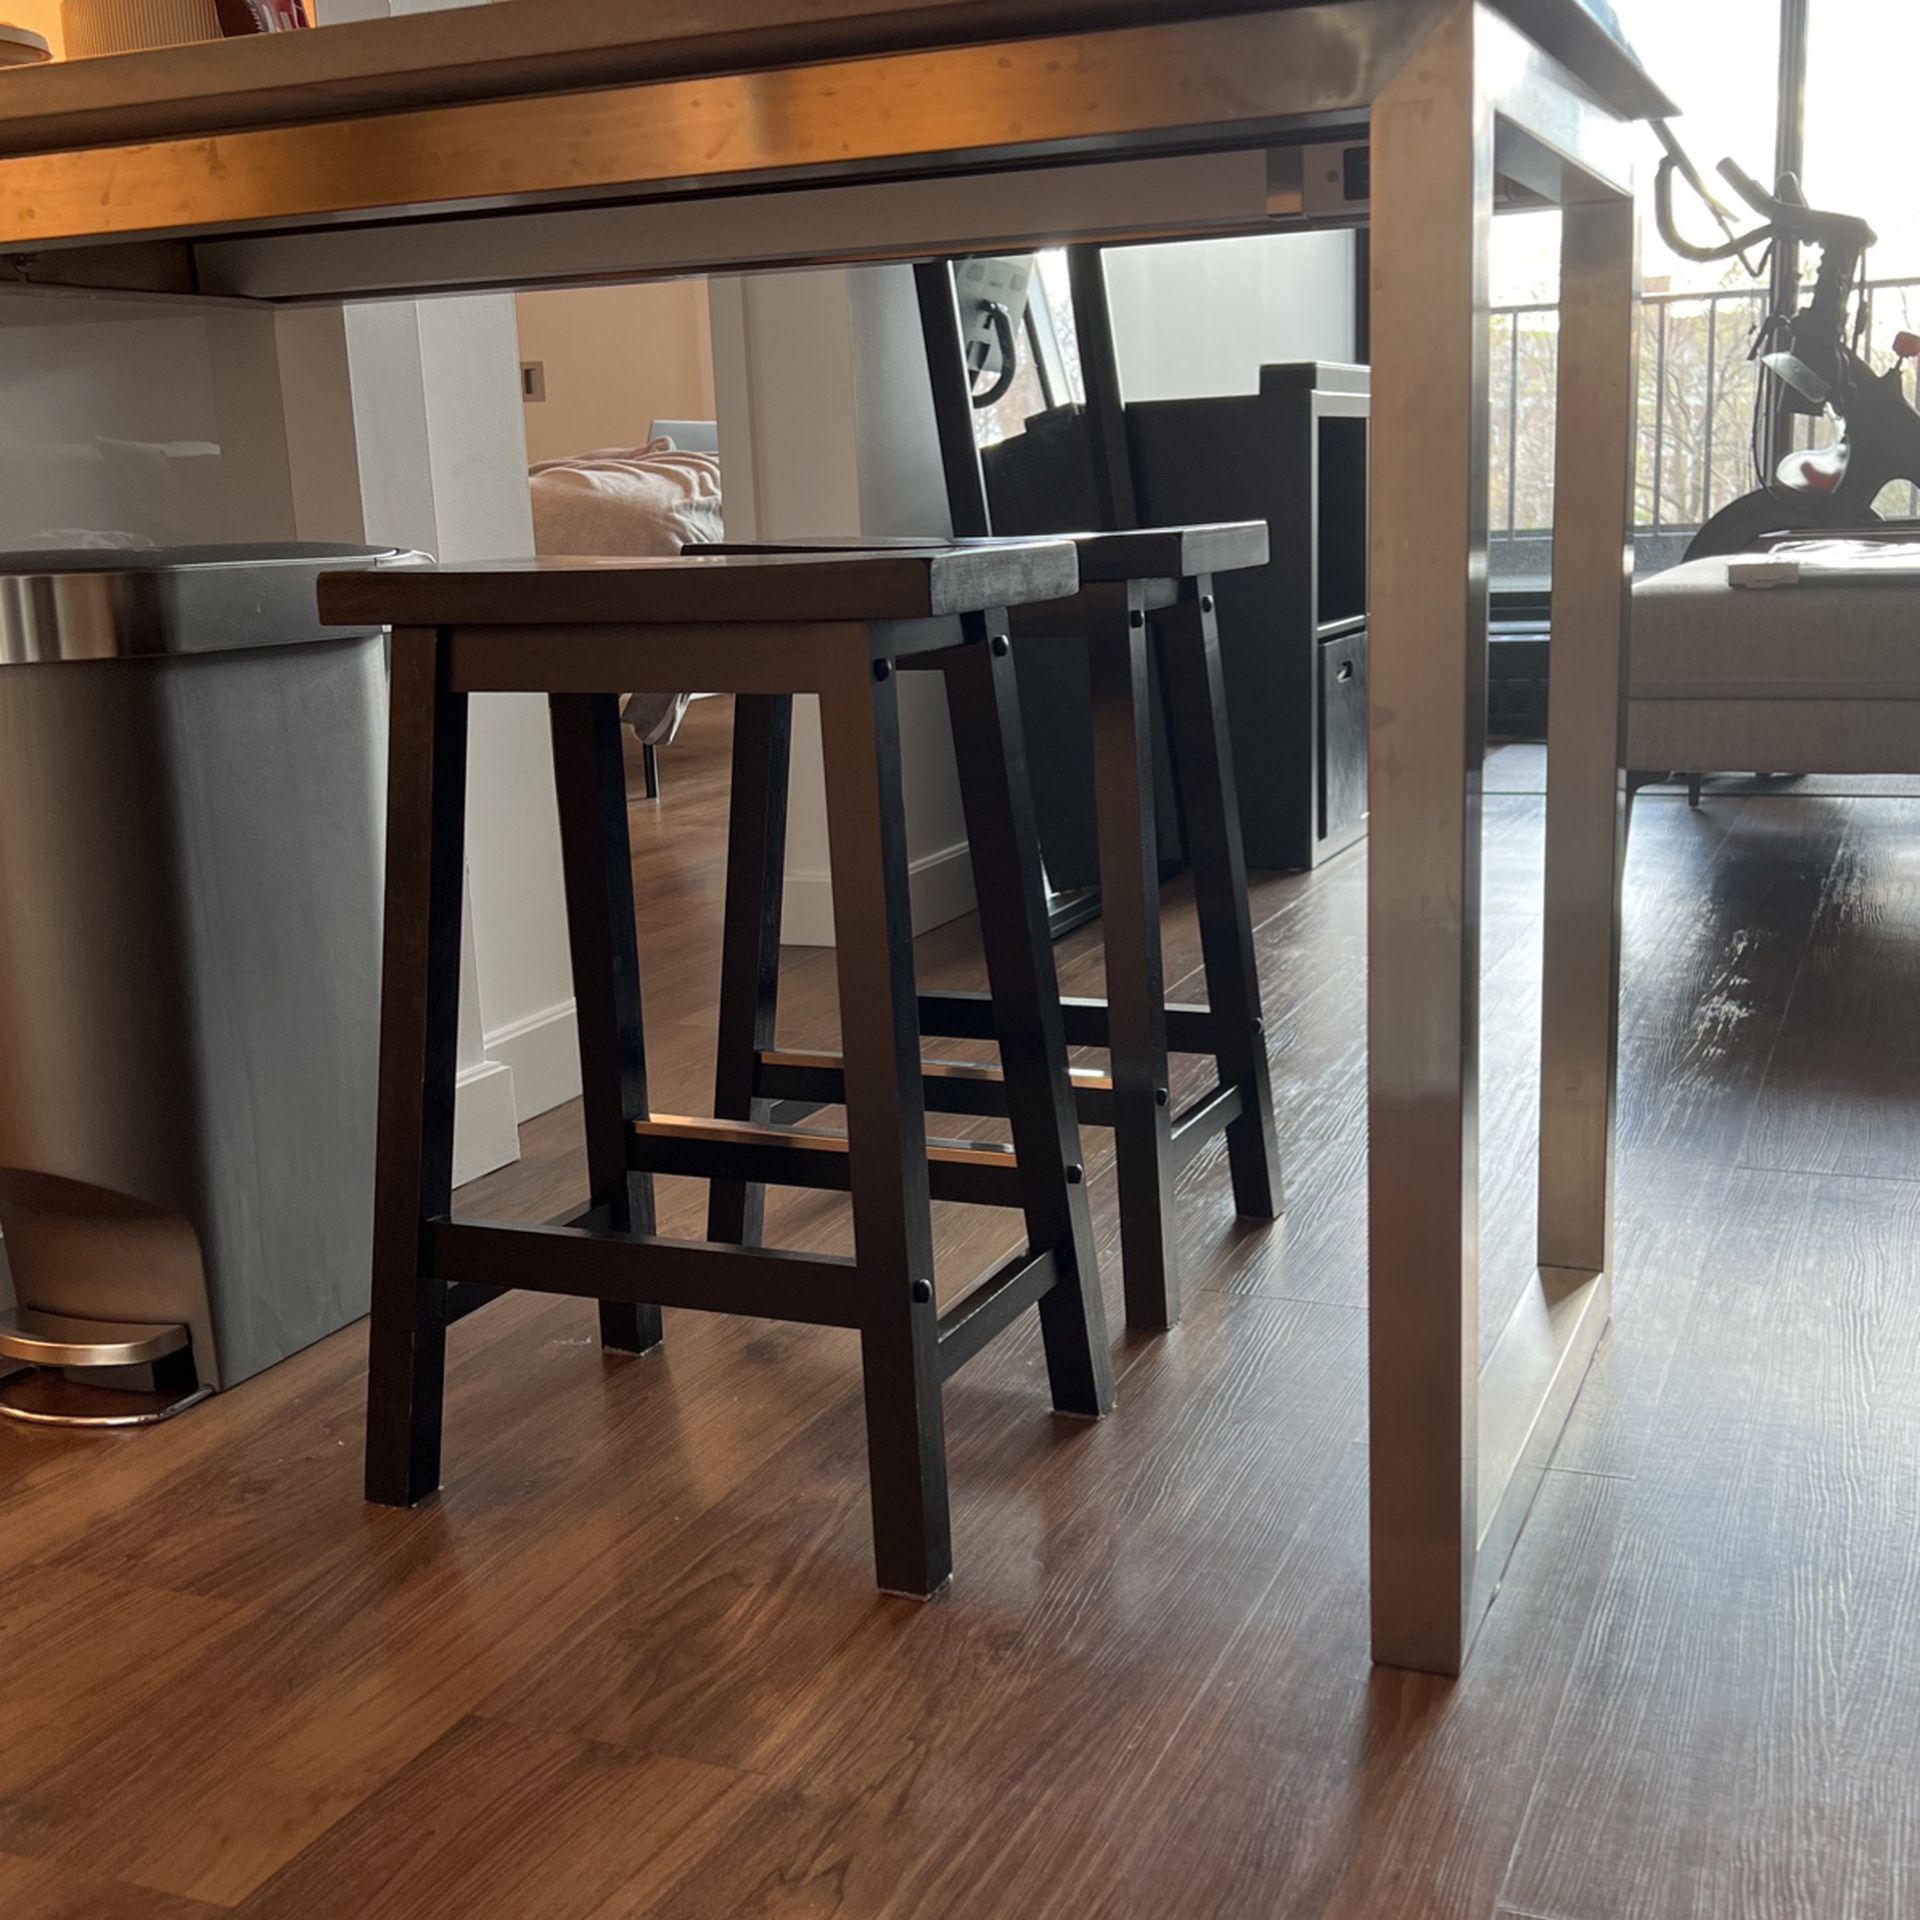 2 Counter Height Barstools